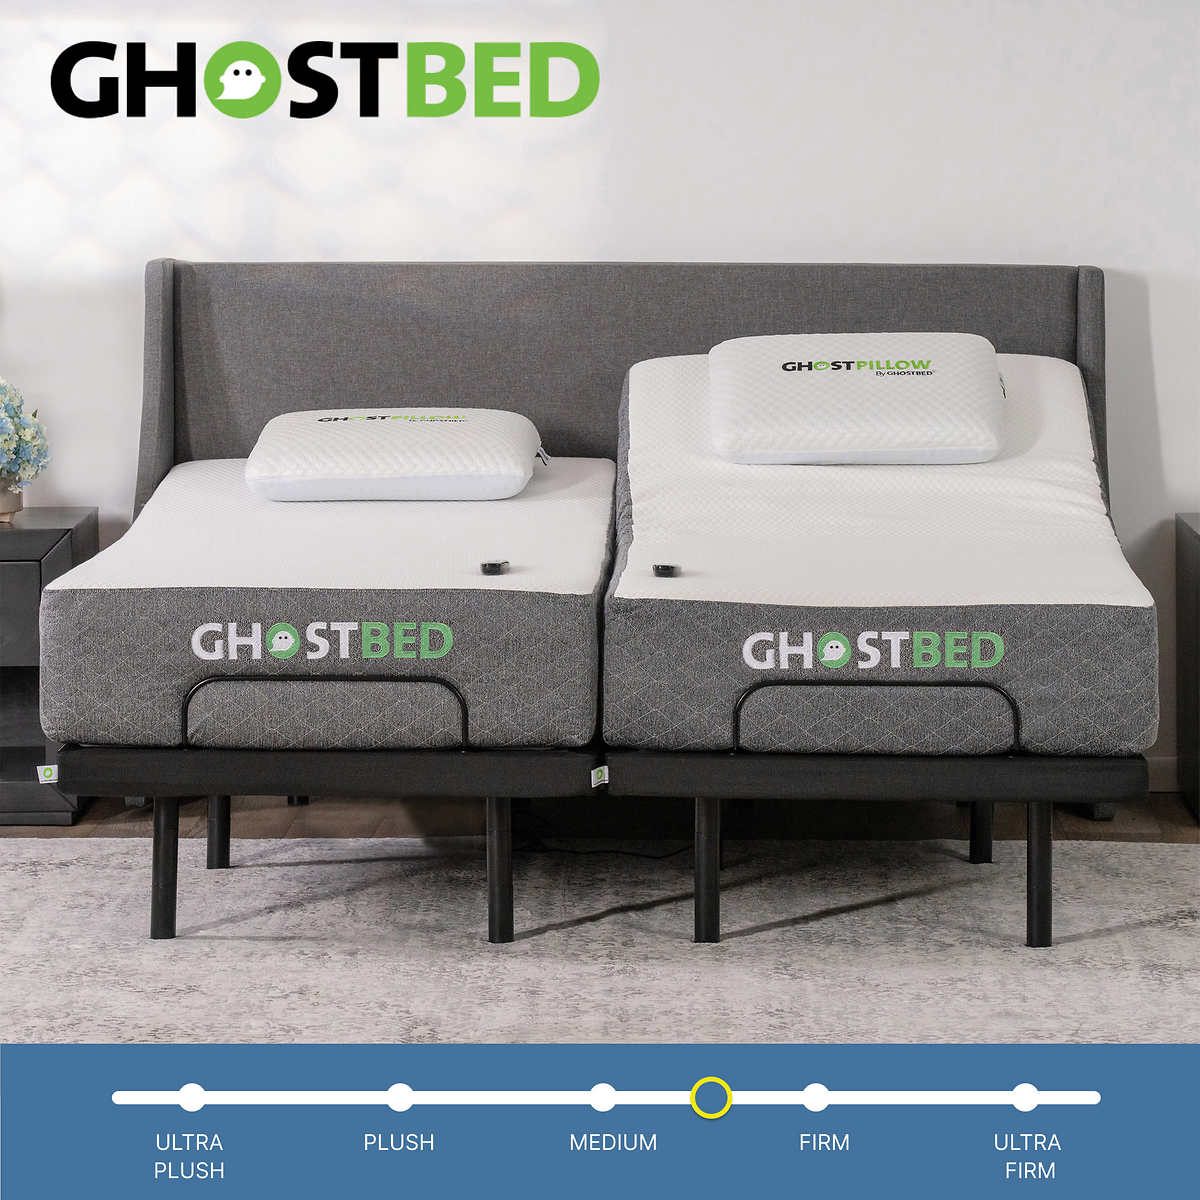 Ghostbed 11 Memory Foam Mattress With, Queen Size Dual Adjustable Bed